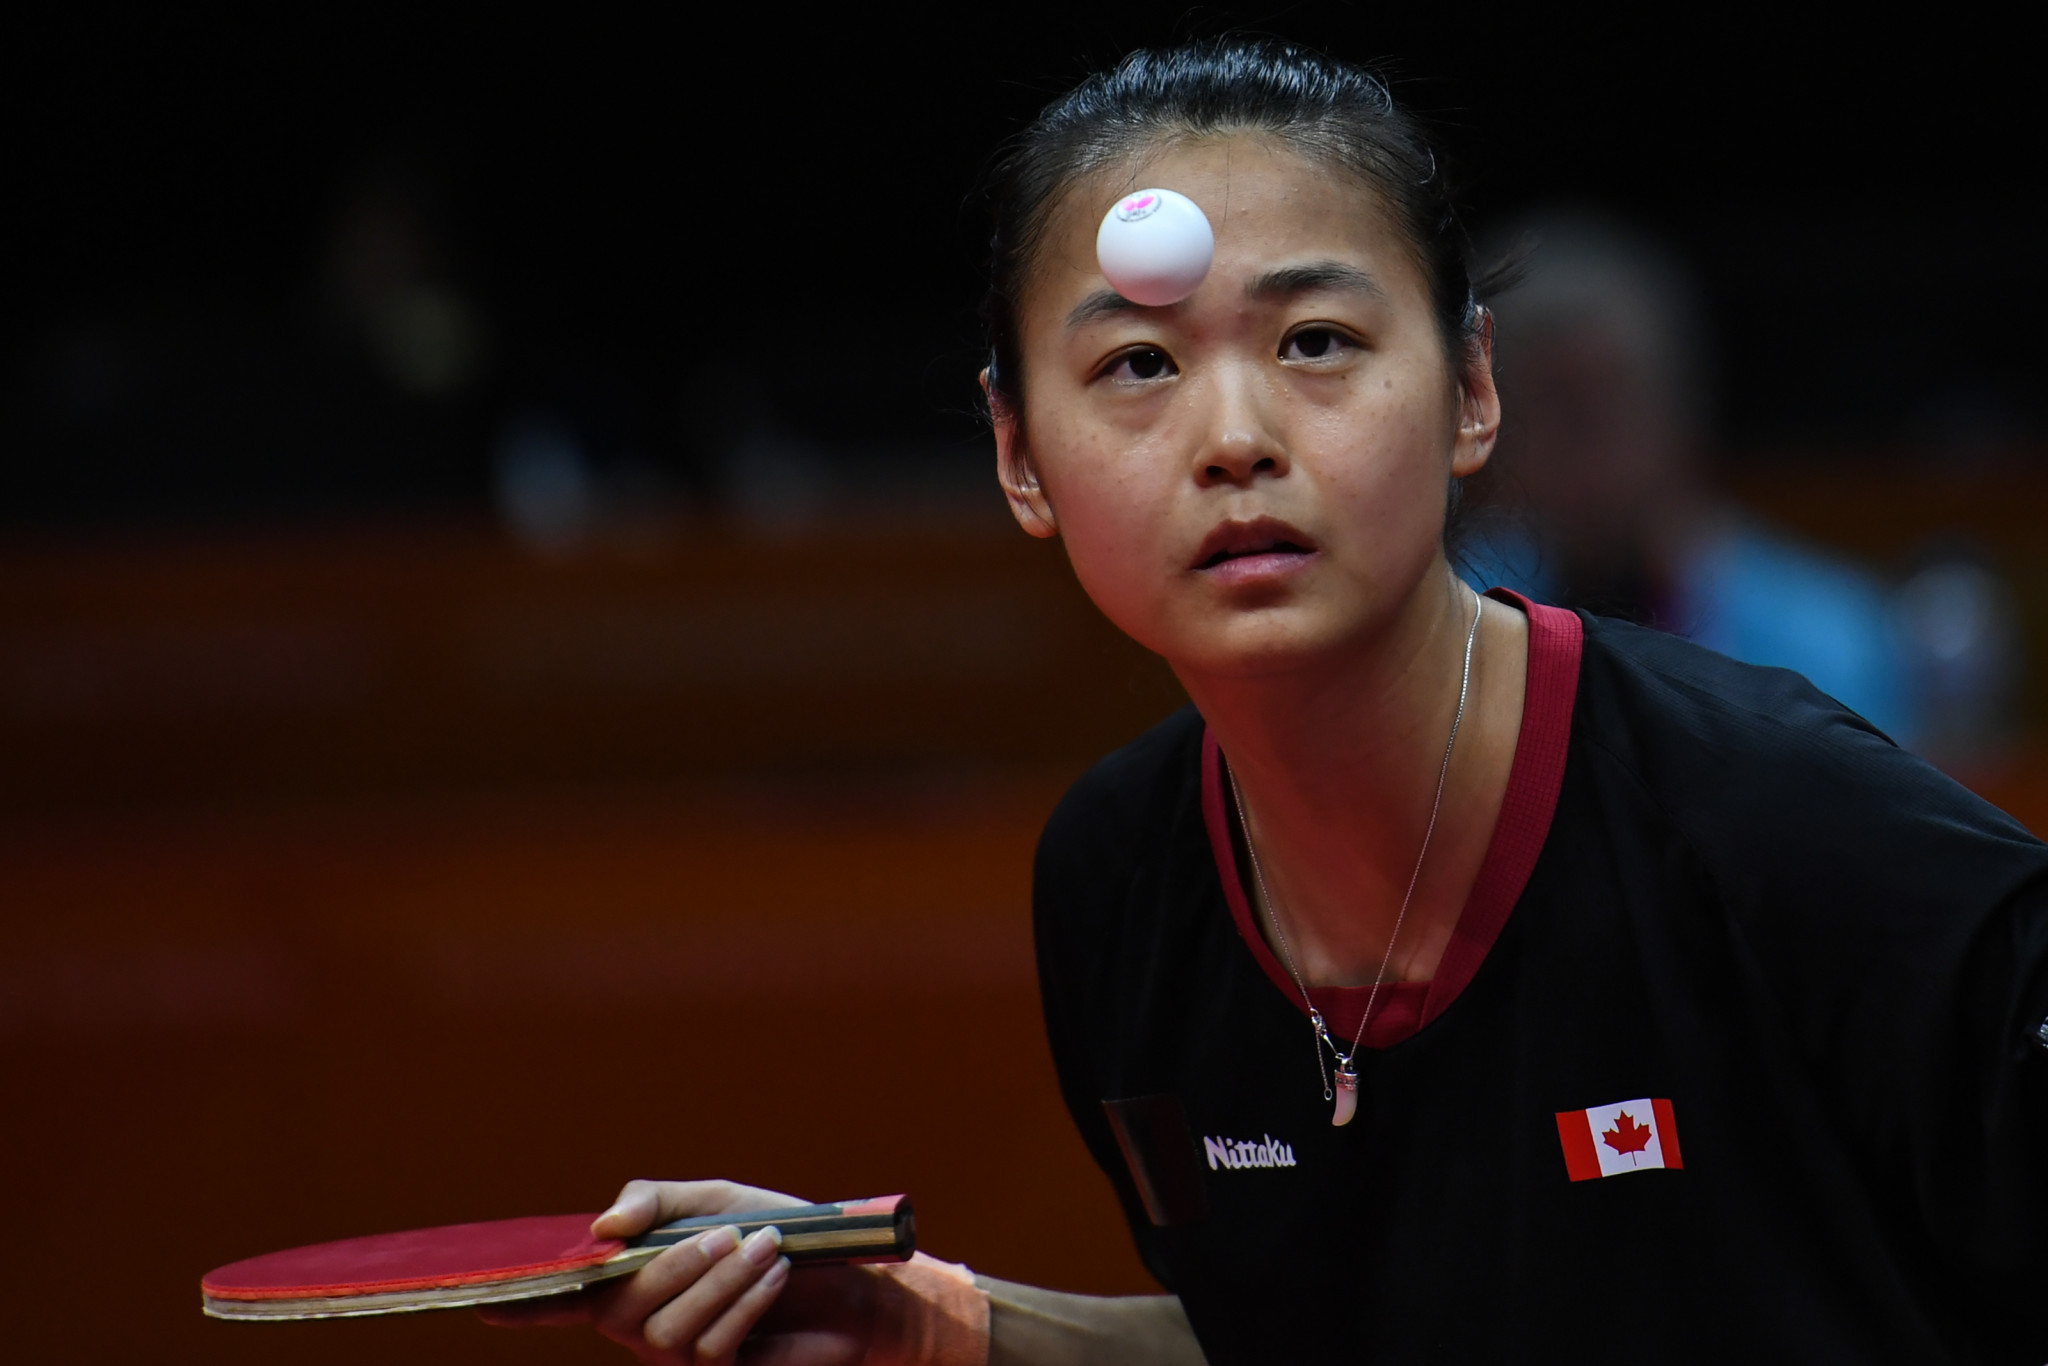 Canada's Mo Zhang made the women's final for the second straight year ©Getty Images